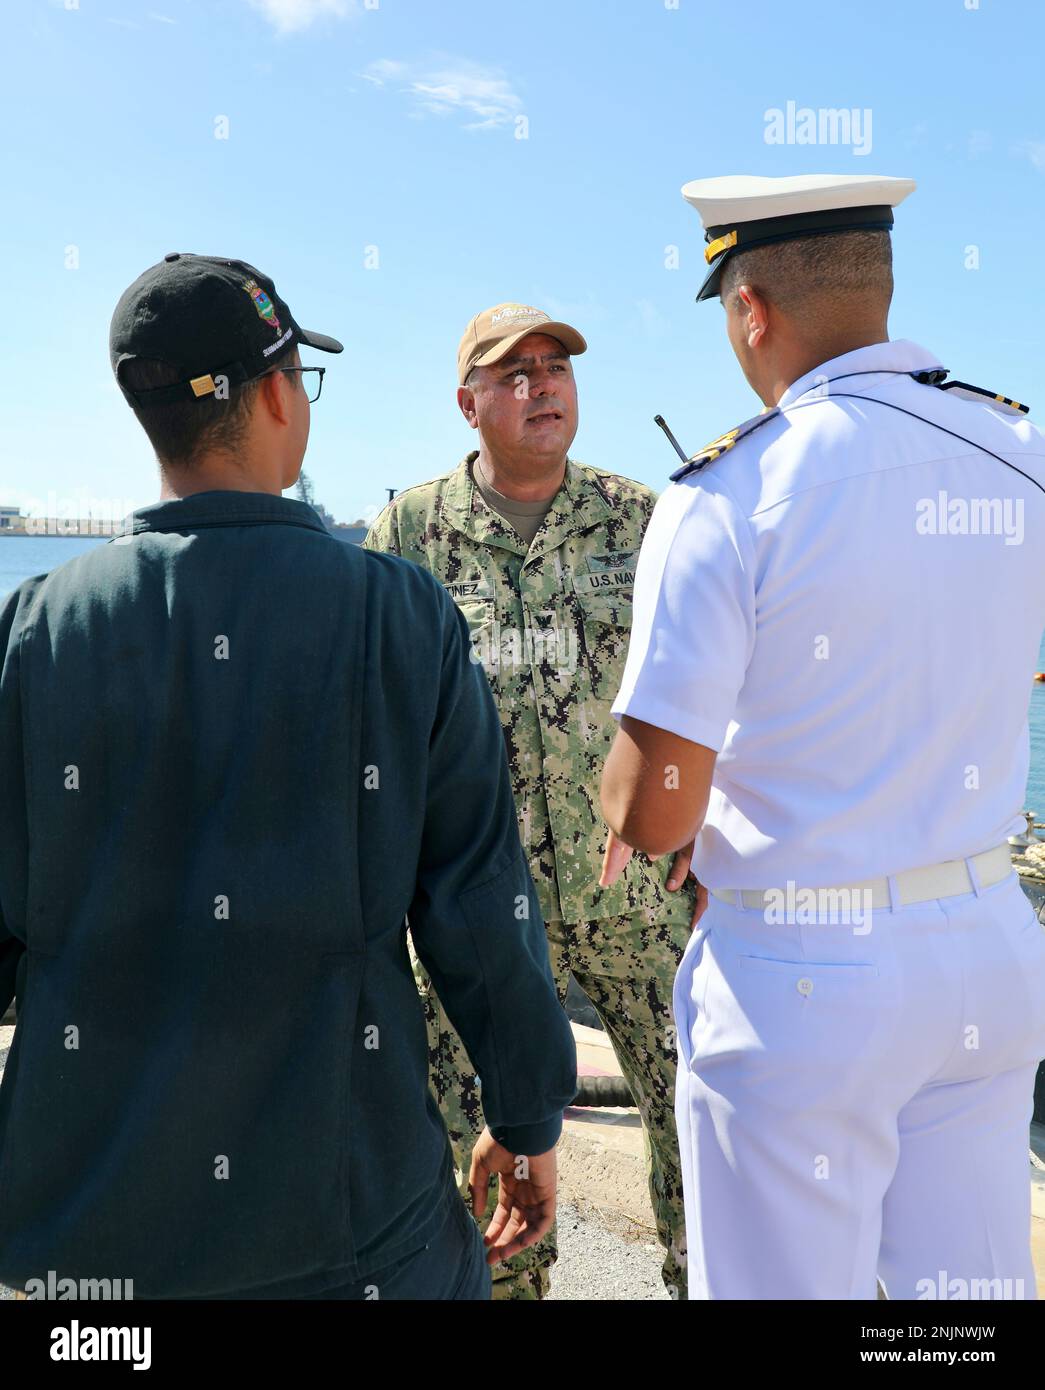 U.S. Navy Logistics Specialist 1st Class Luis Martinez, center, discusses an upcoming fuel delivery with Brazilian submarine crewmembers Nelson Luiz Moreira Da Silva Jr., right, and Gabriel Fontes Melo Bitencort. Stock Photo